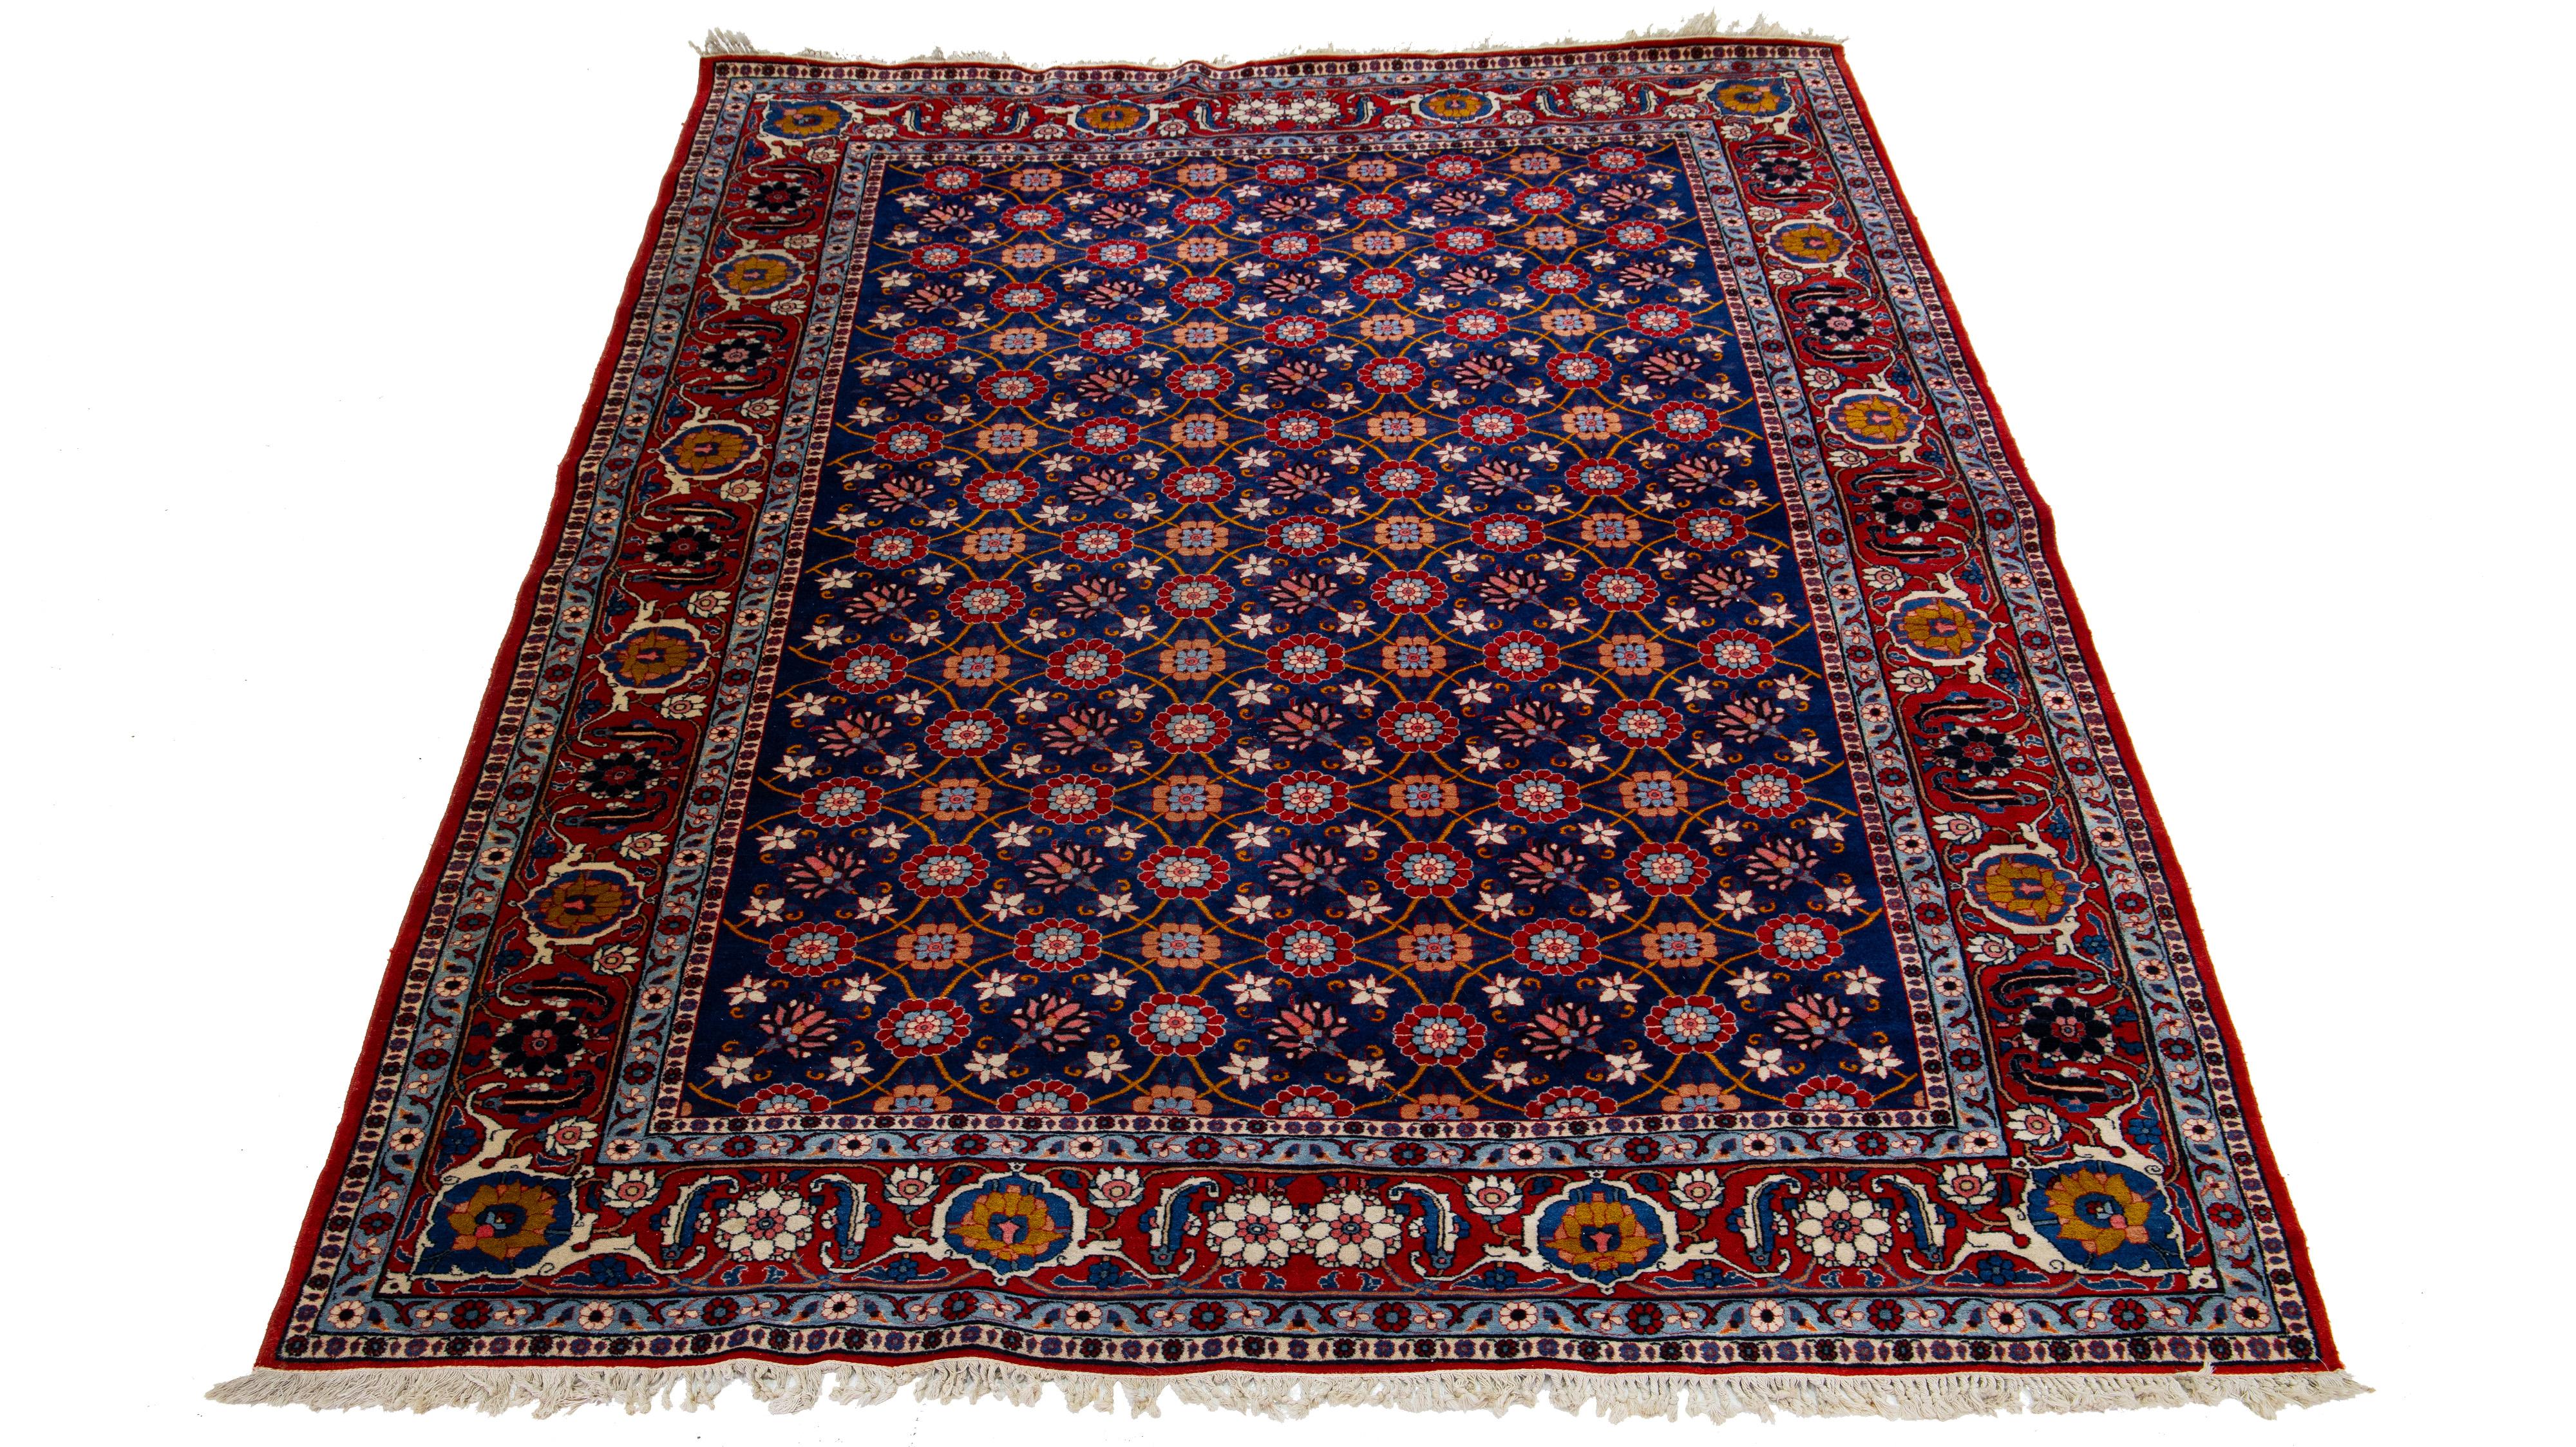 The meticulously handmade Persian Tabriz woolen rug, dating back to the 1920s, exhibits a striking, classical floral motif. An audacious multi-hued blend enhances the design, contrasting the rug's bold blue backdrop.

This rug measures 7'3